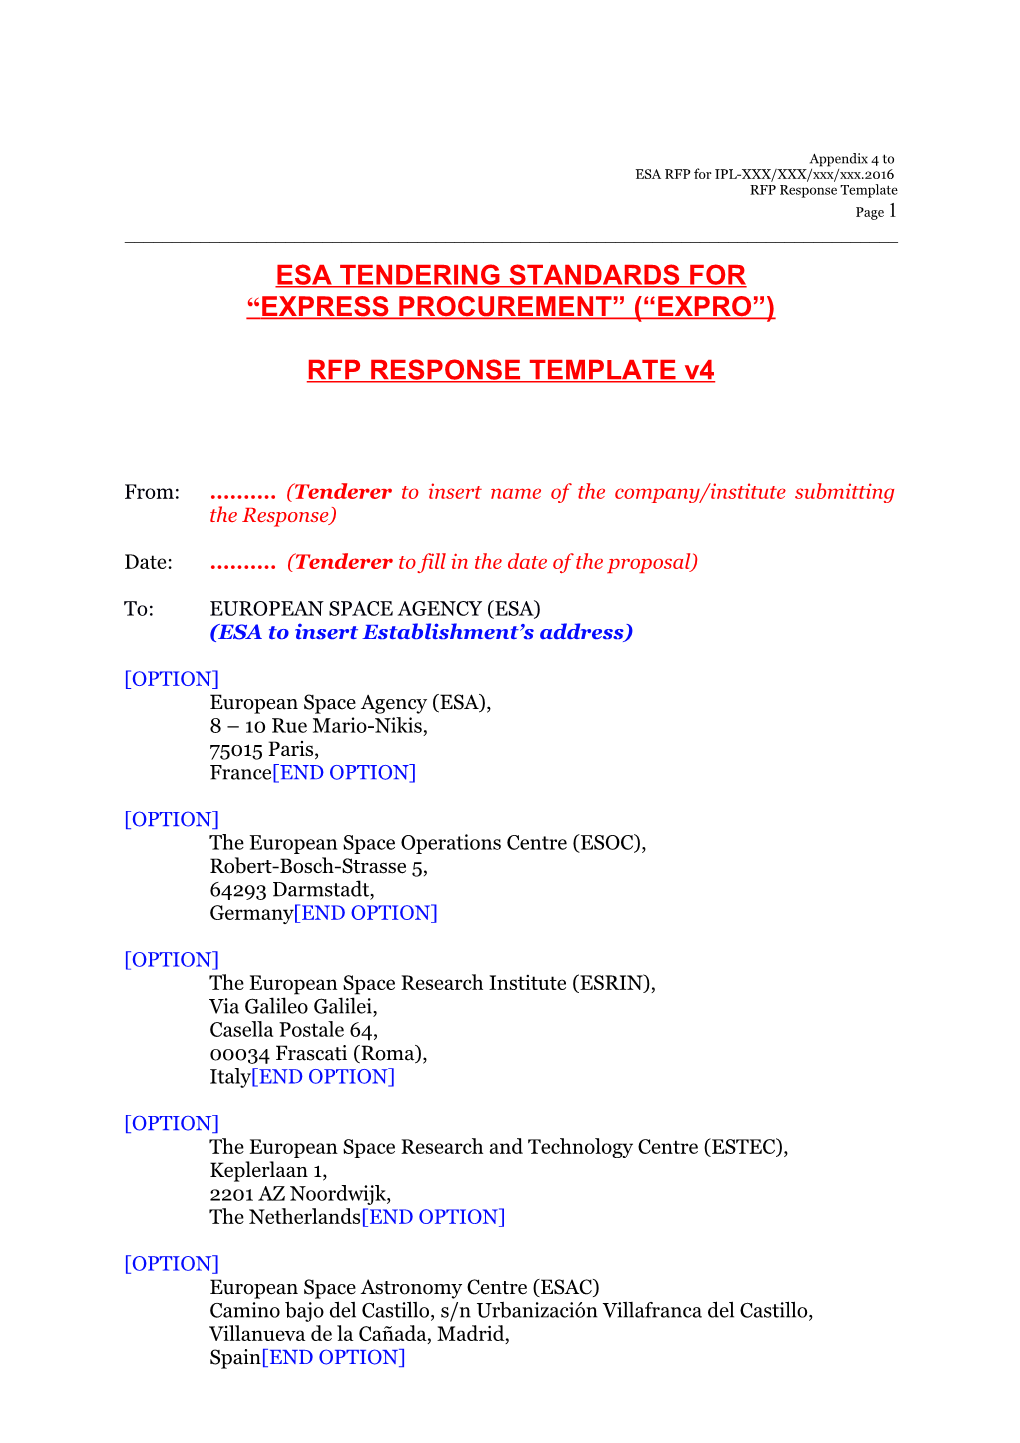 Appendix 4 to ITT Simplified Tendering: Proposal Template Incl. Annex 1